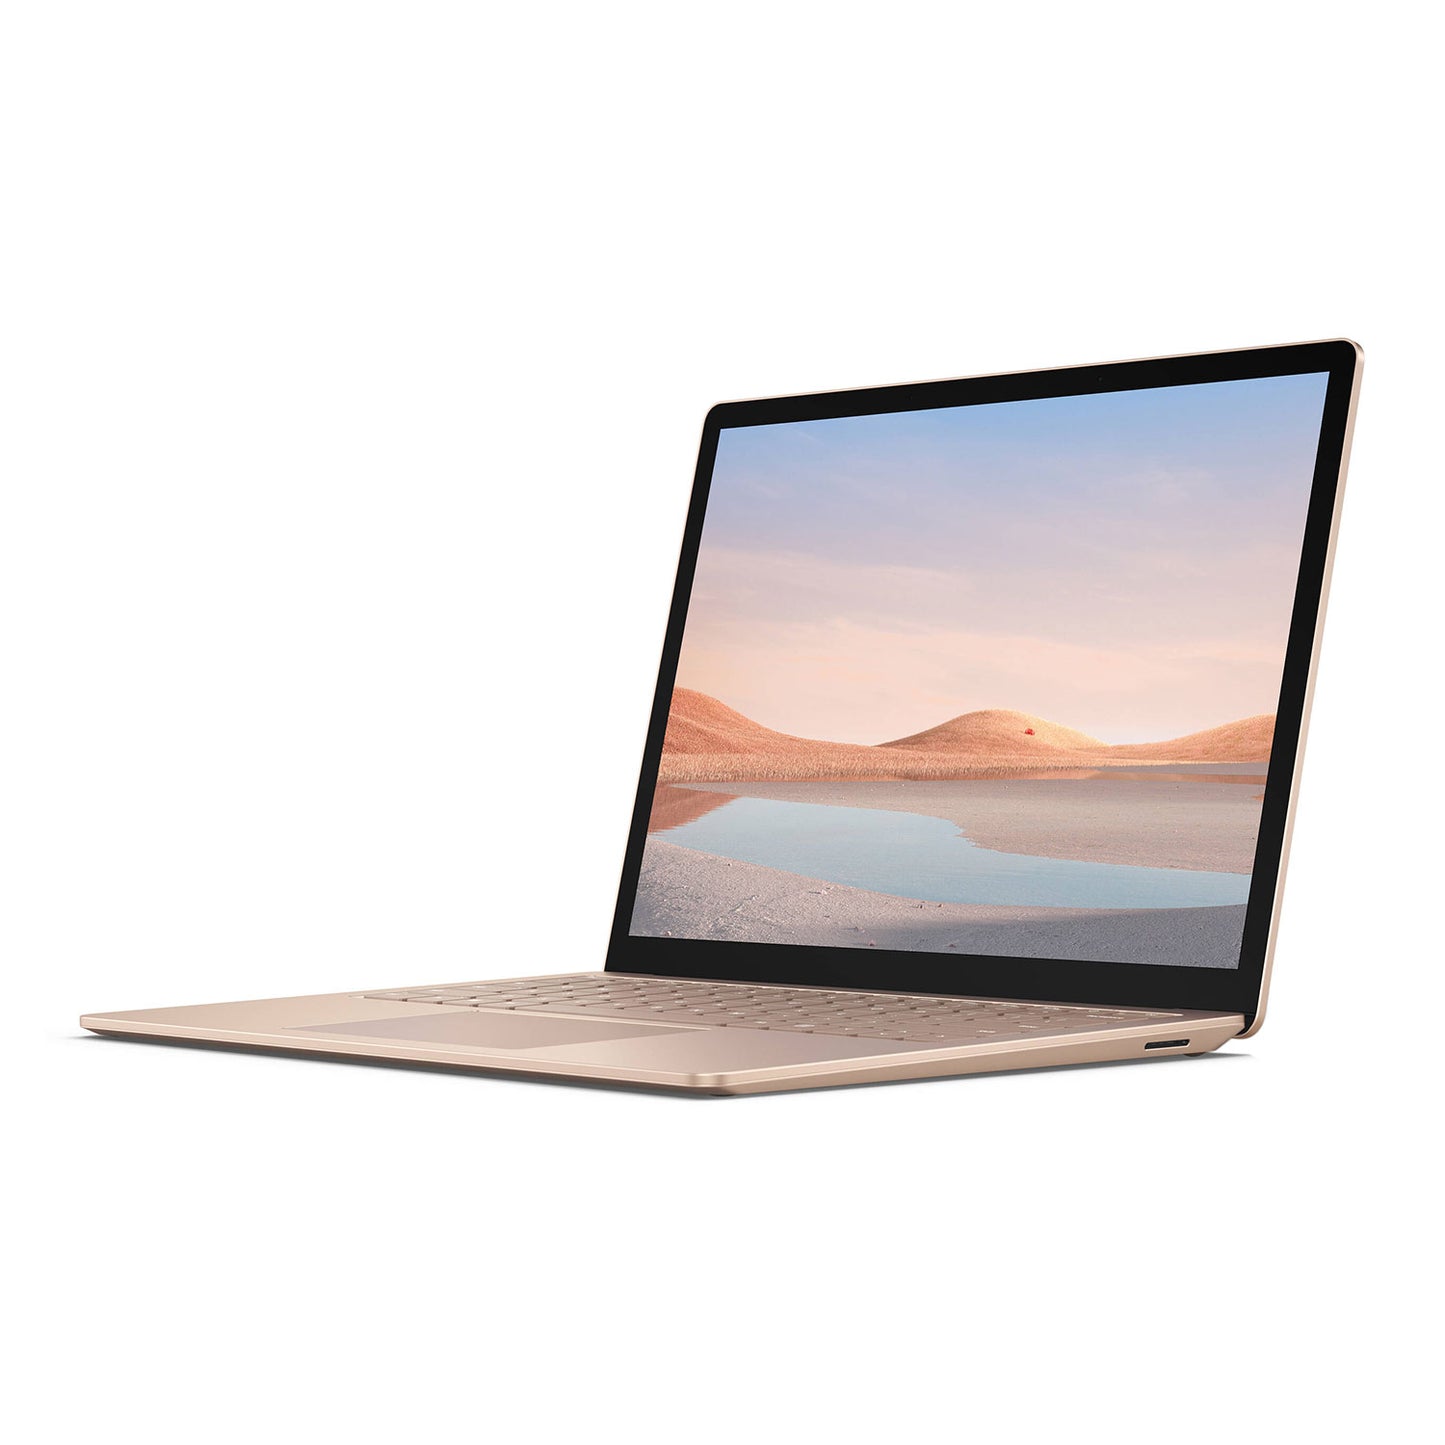 Microsoft Surface Laptop 4 13.5" Touch i7-1185G7 16Gb 512Gb SSD W10P Sand